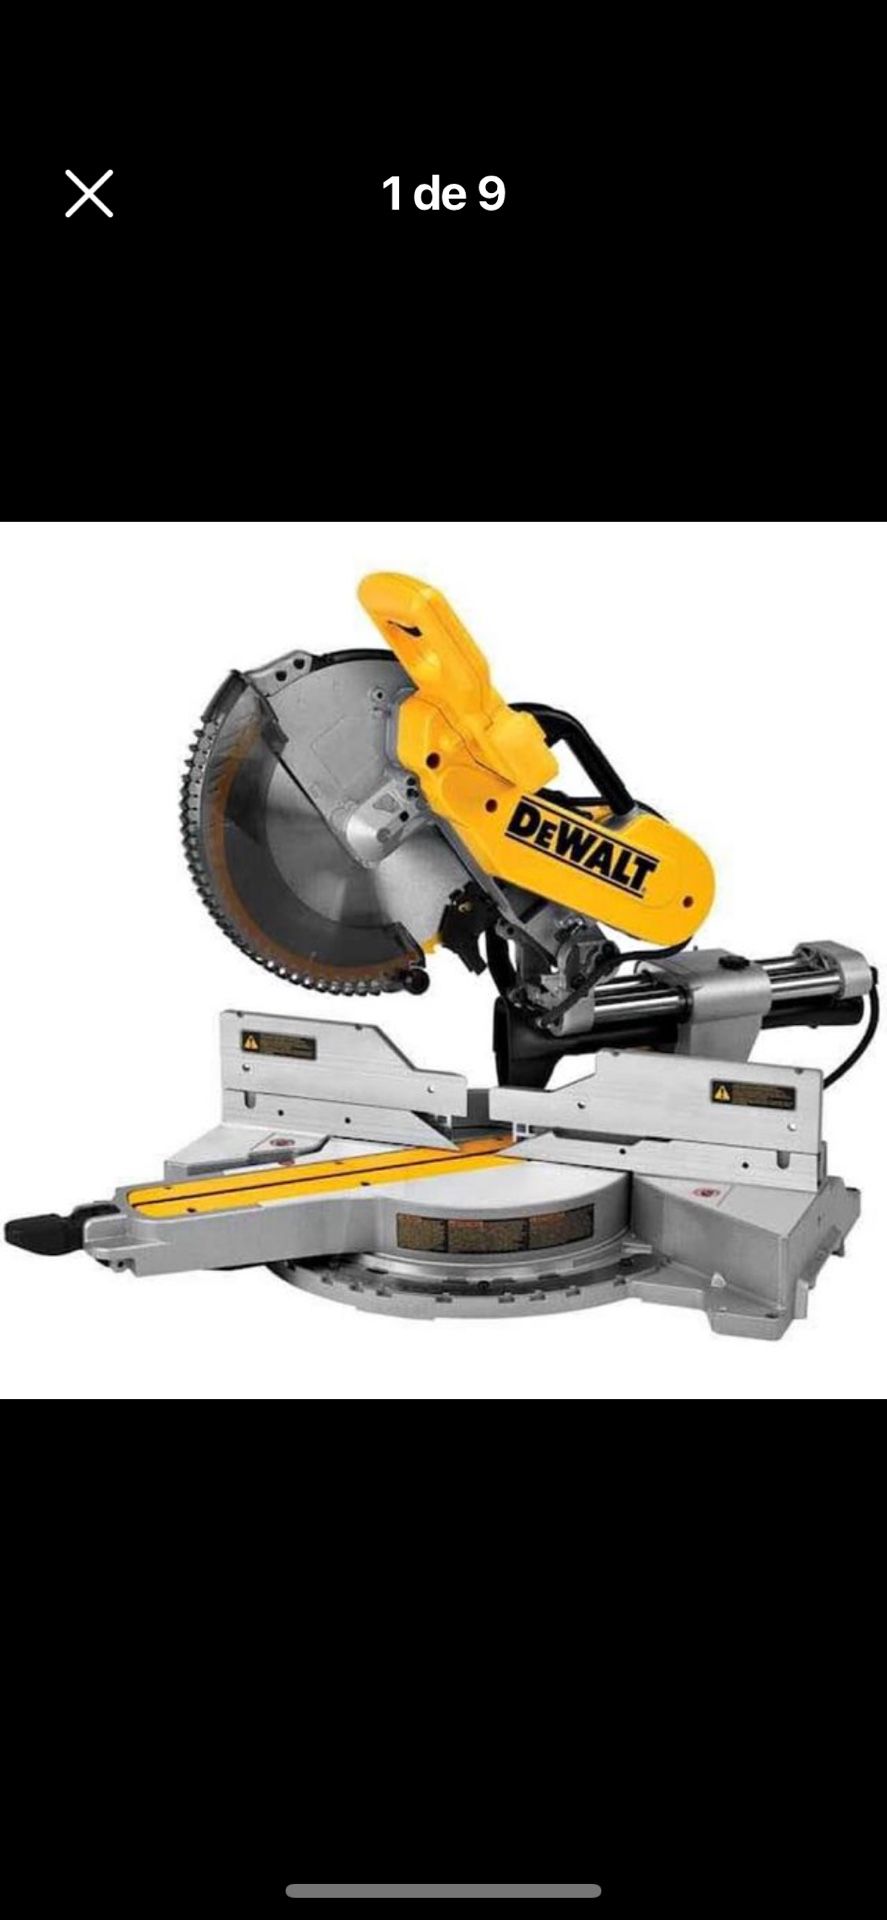 DEWALT 15 Amp Corded 12 in. Double Bevel Sliding Compound Miter Saw, Blade Wrench and Material Clamp